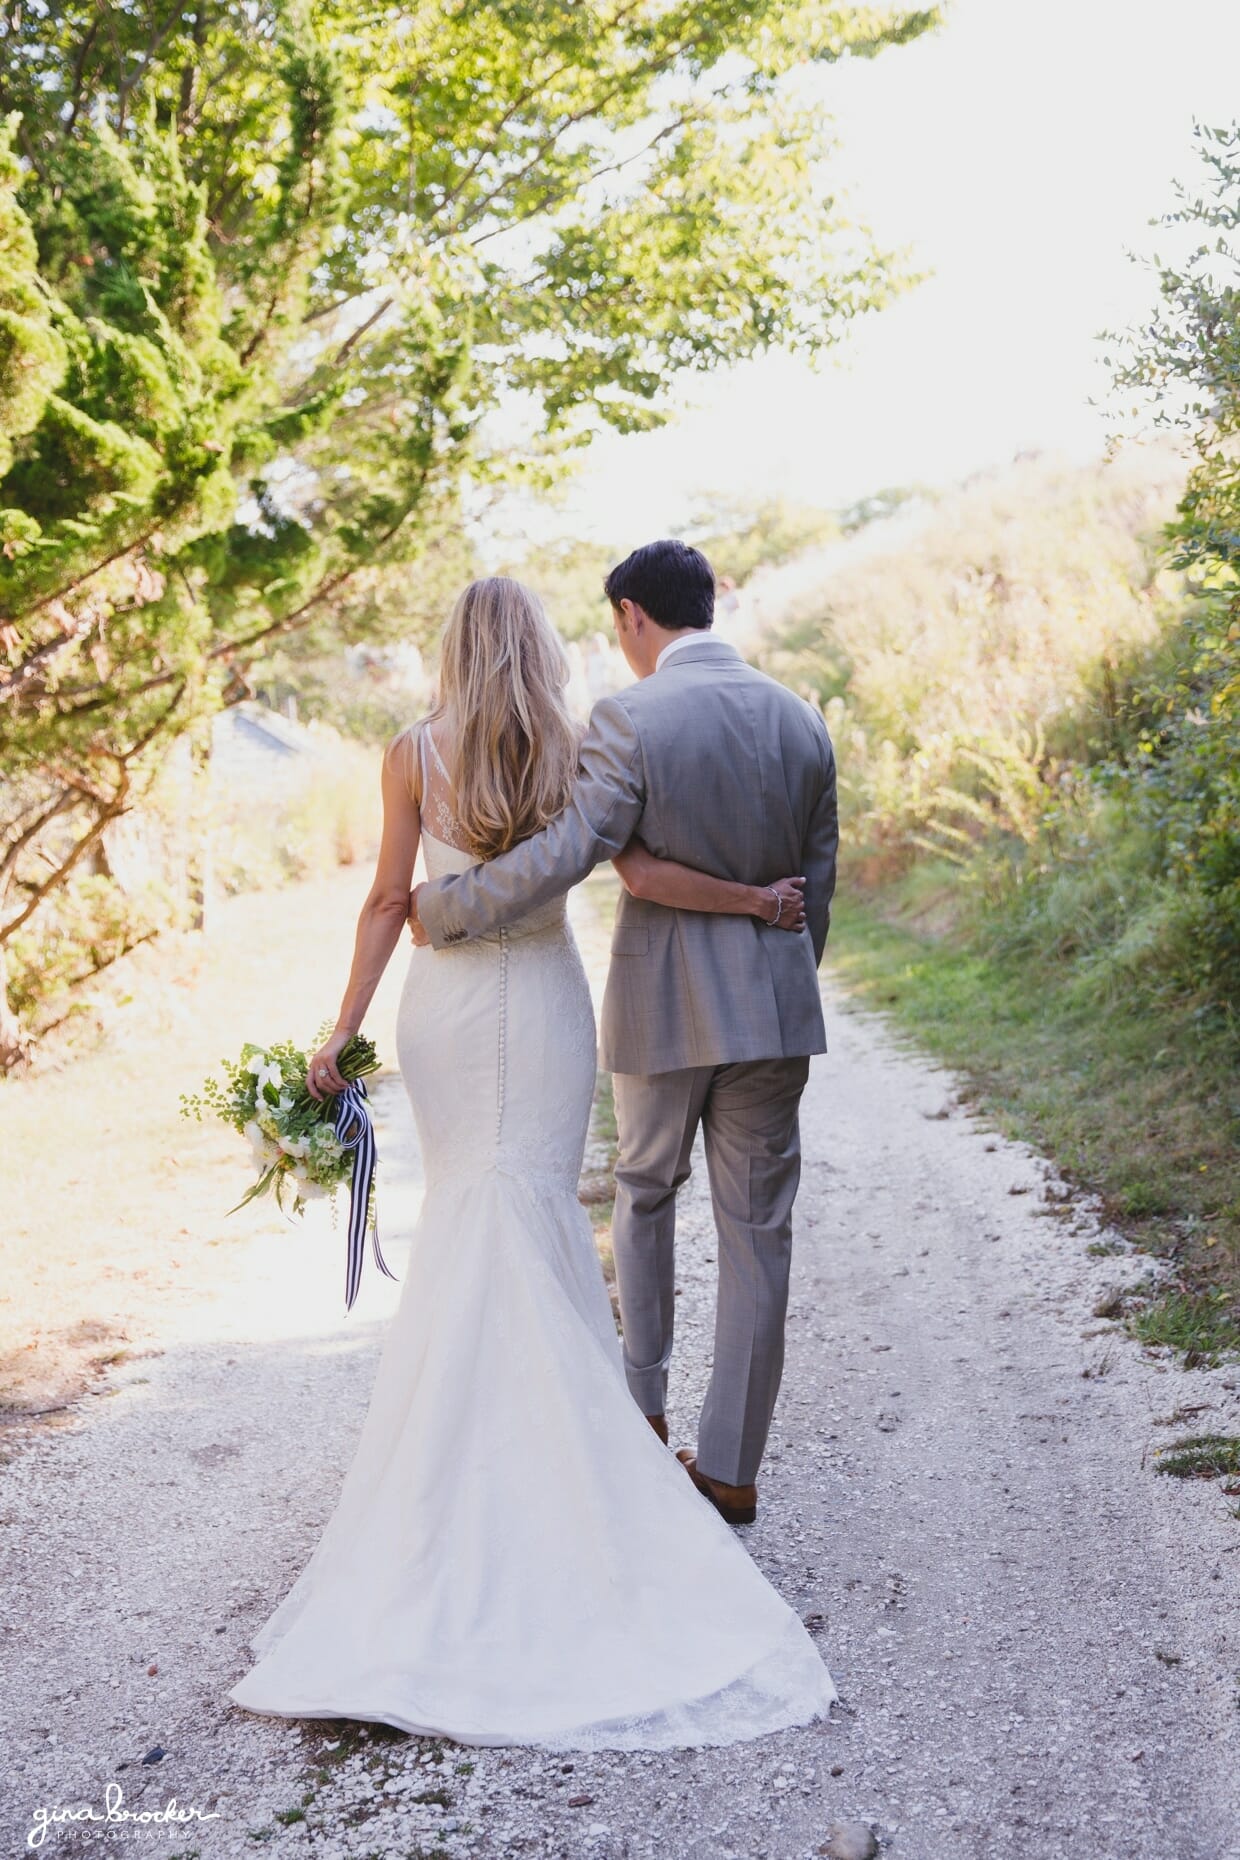 A romantic portrait of a bride and groom walking away together during their nantucket wedding at the Westmoor Club